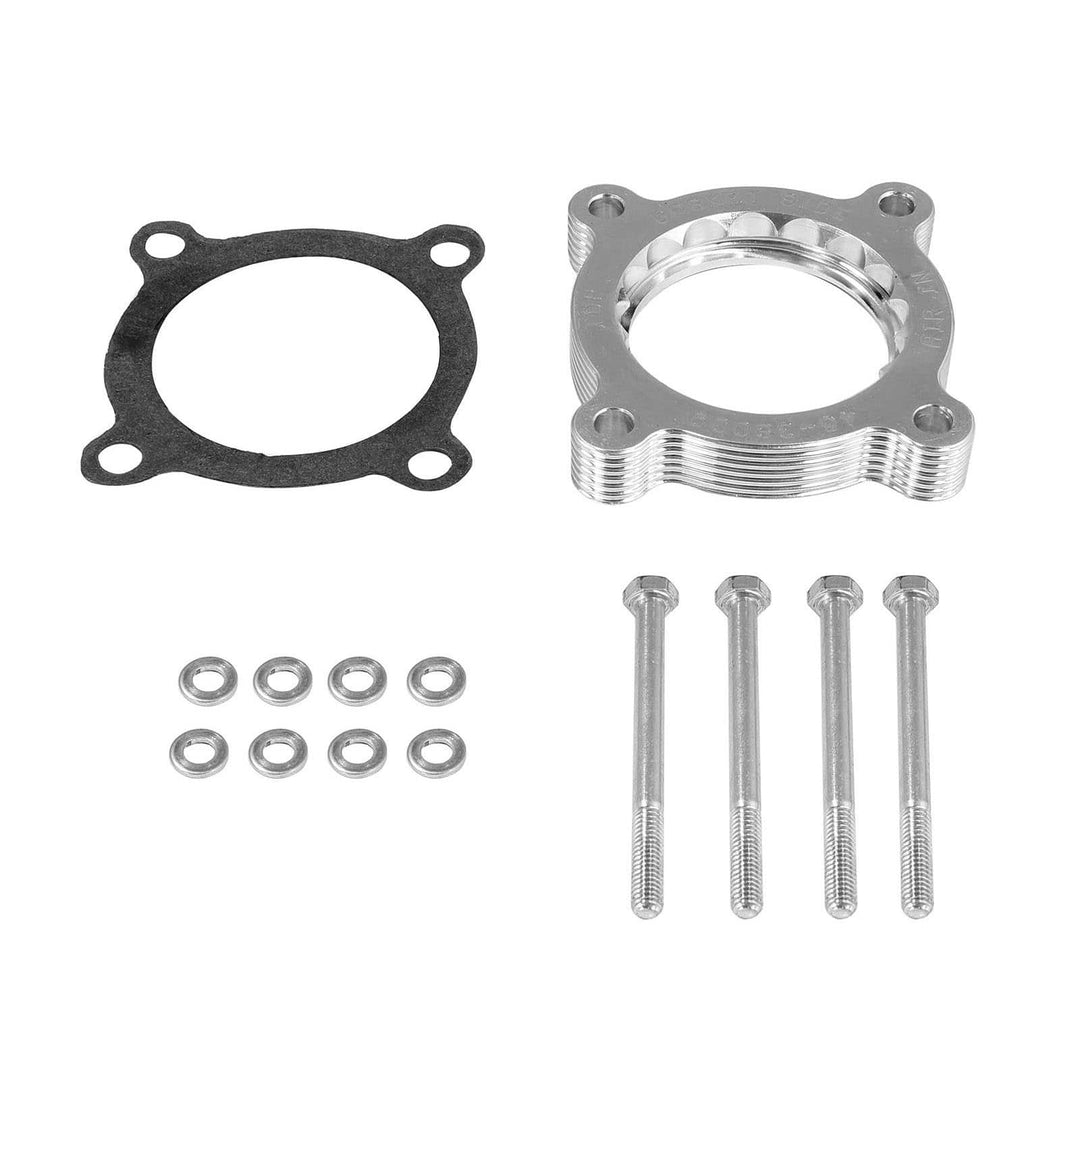 aFe Power Silver Bullet Throttle Body Spacer Scion FR-S 13-16 / Toyota 86 17-20 Subaru BRZ 13-20 H4-2.0L - Dirty Racing Products